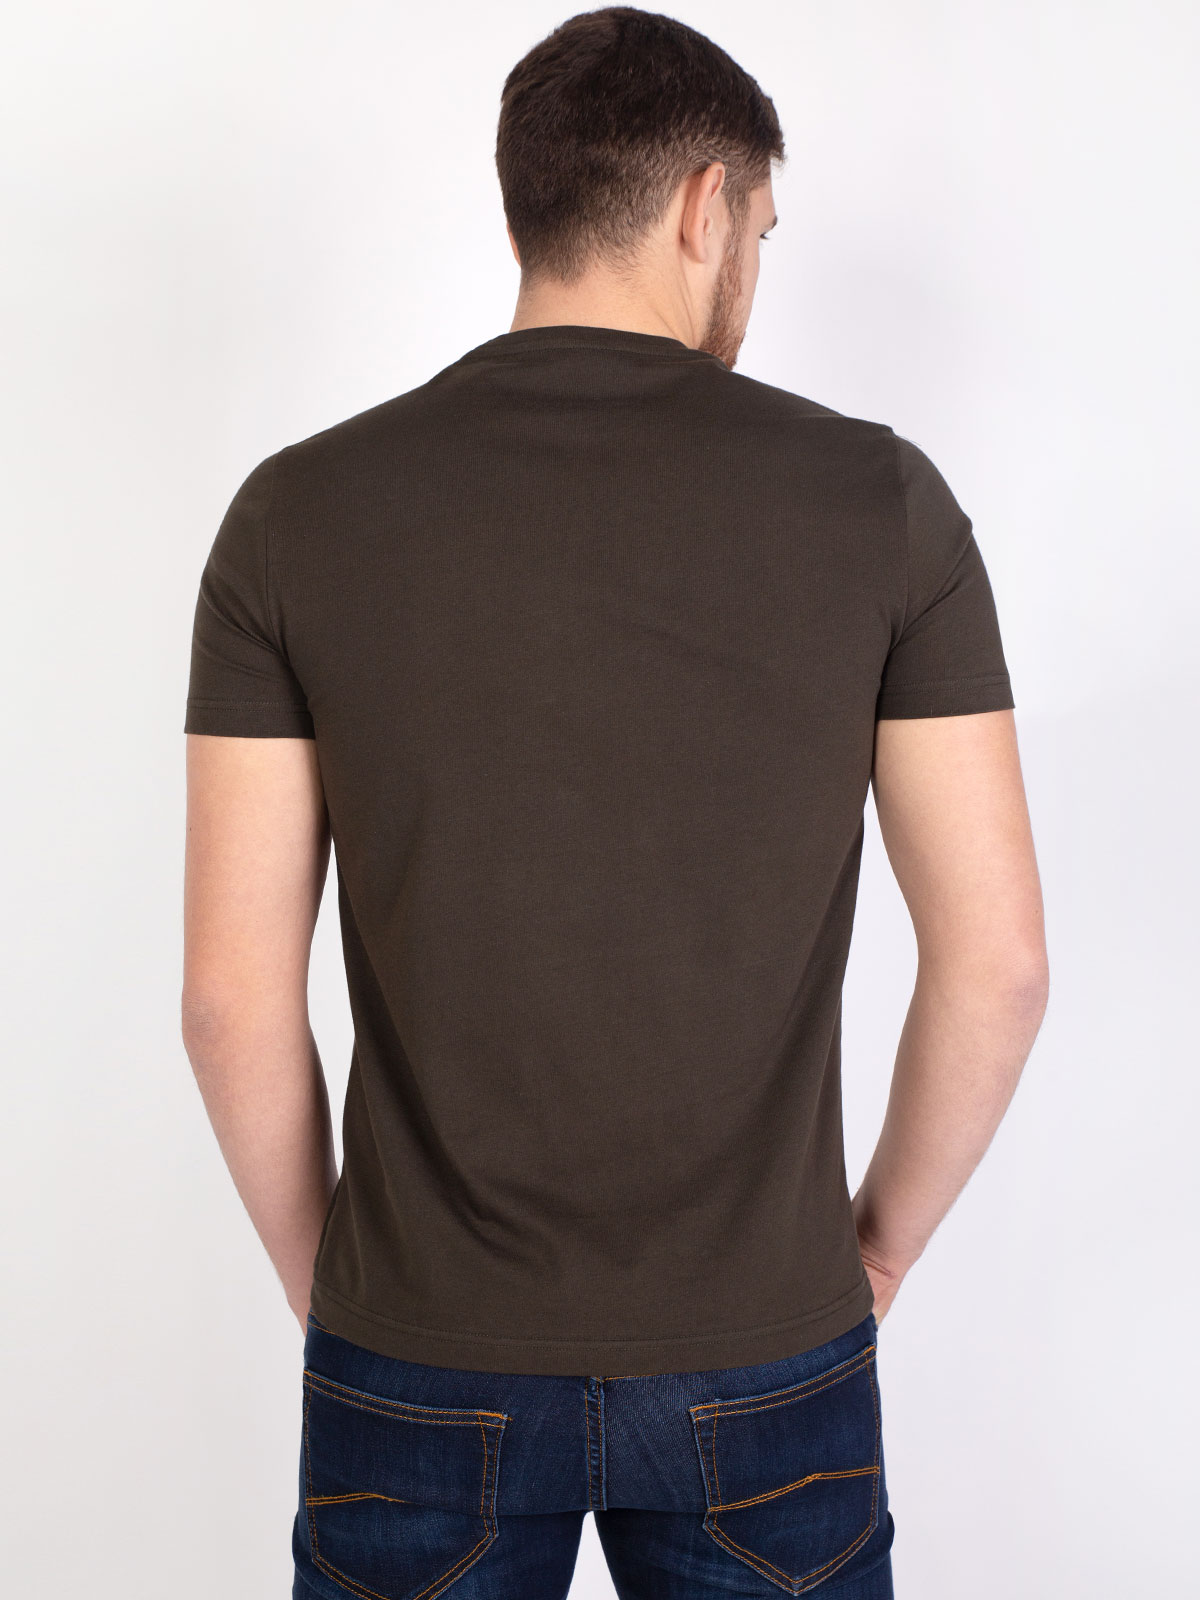 Tshirt in dark green with a round patch - 96385 € 11.81 img4